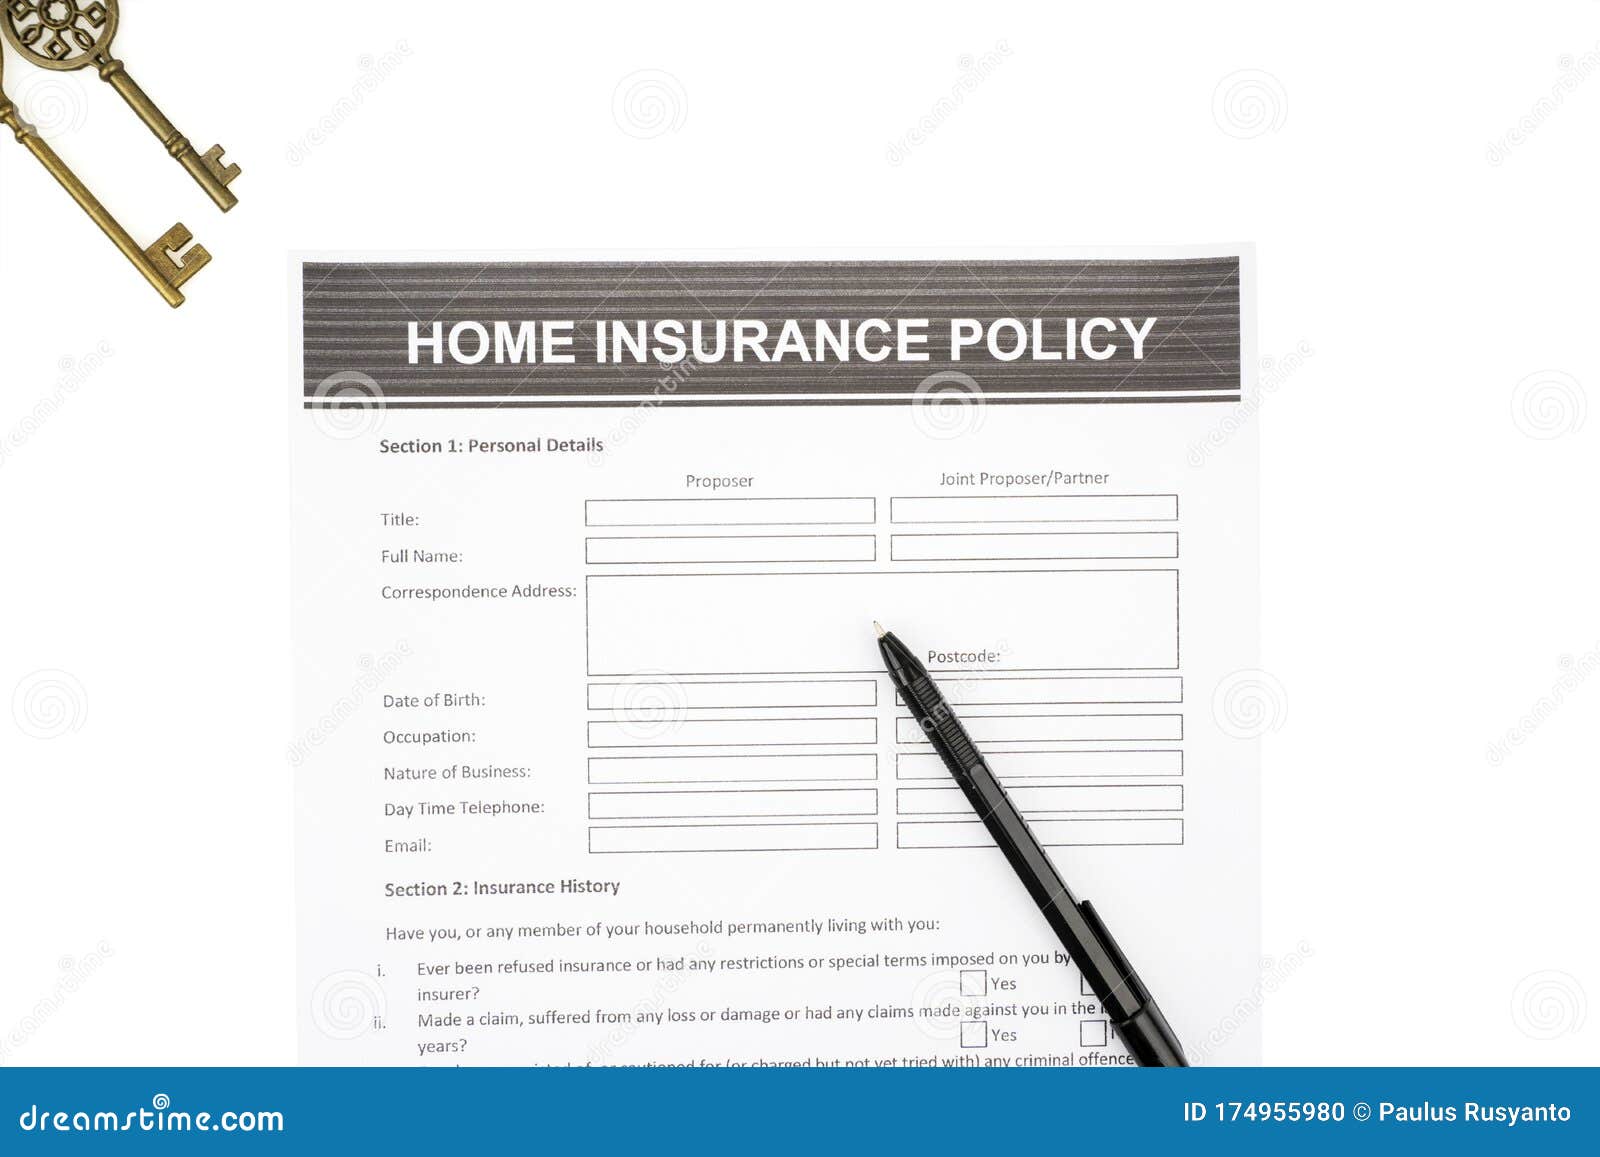 Home Insurance Policy Document Near A Pen And Keys Stock Photo Image Of Object Home 174955980